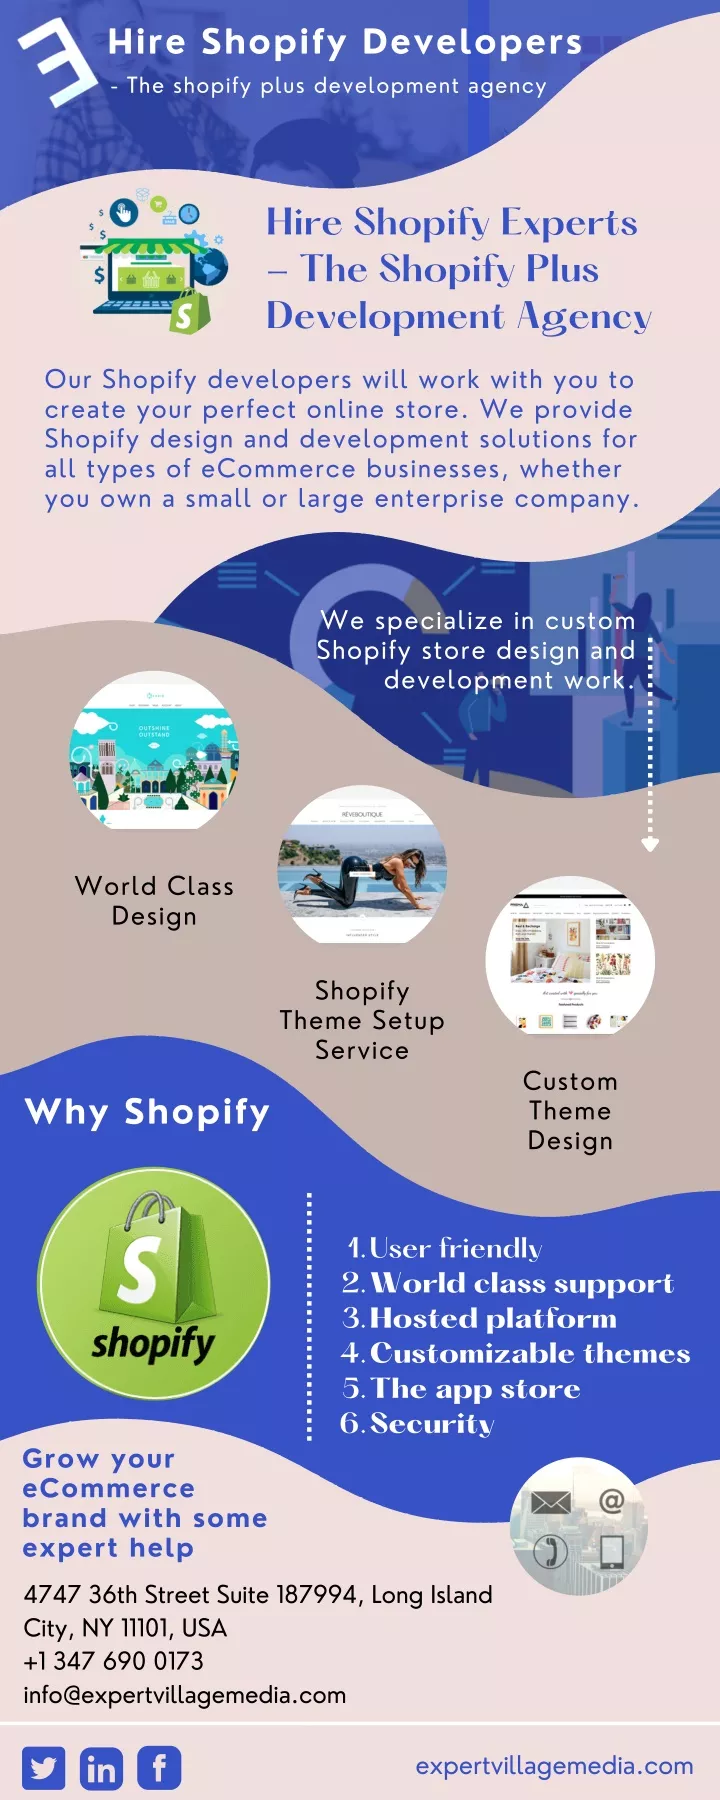 hire shopify developers the shopify plus